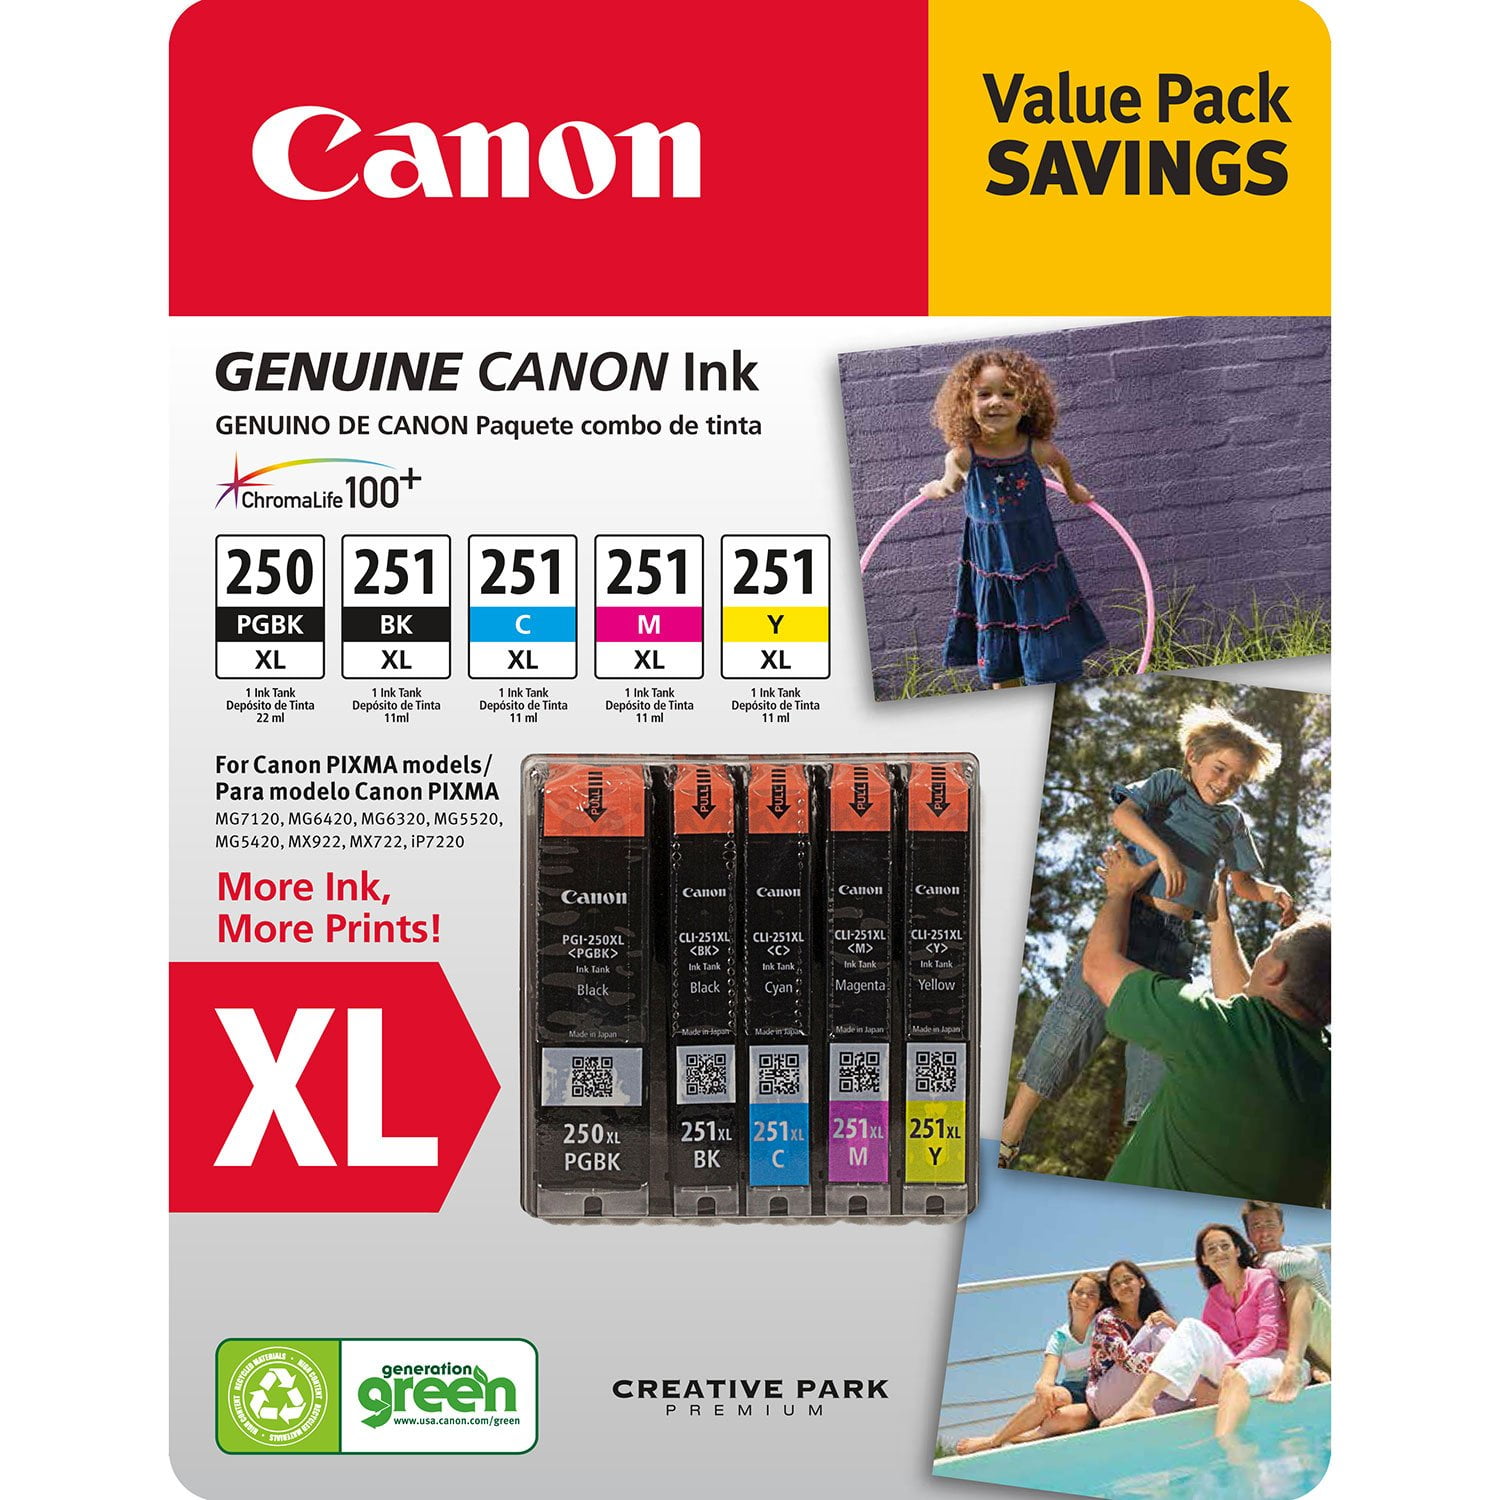 3-PACK Canon GENUINE CLI-251XL Color Ink MG6320 MG6420 MG6620 RETAIL BOX 